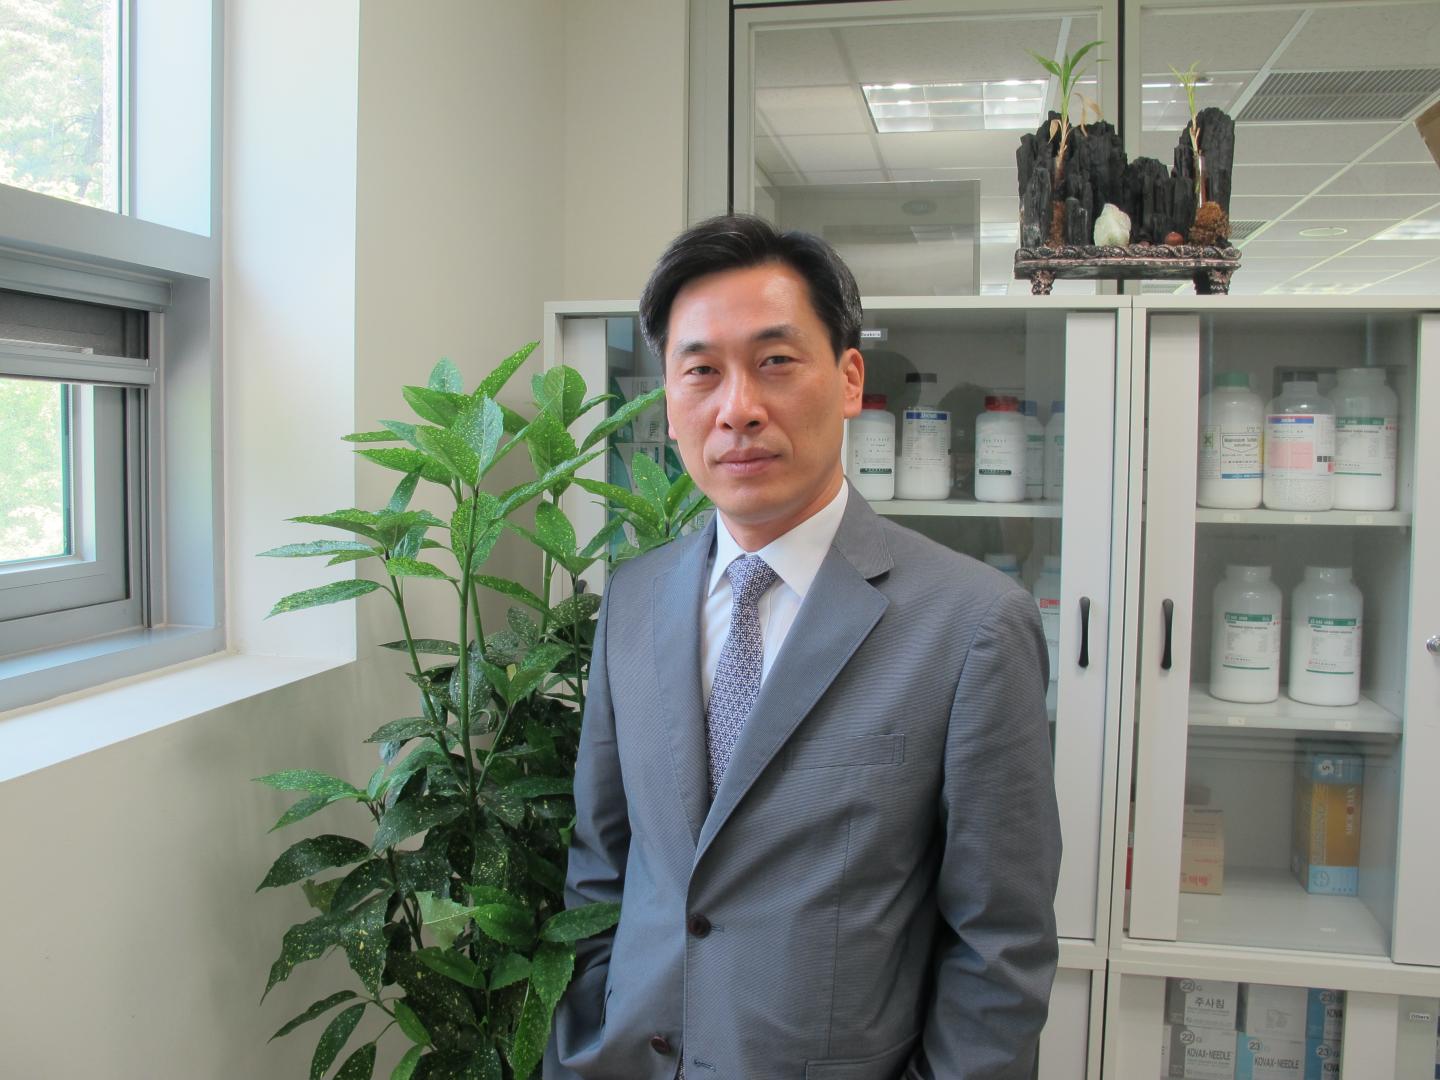 Dr. Jungyeob Ham, Korea Institute of Science and Technology